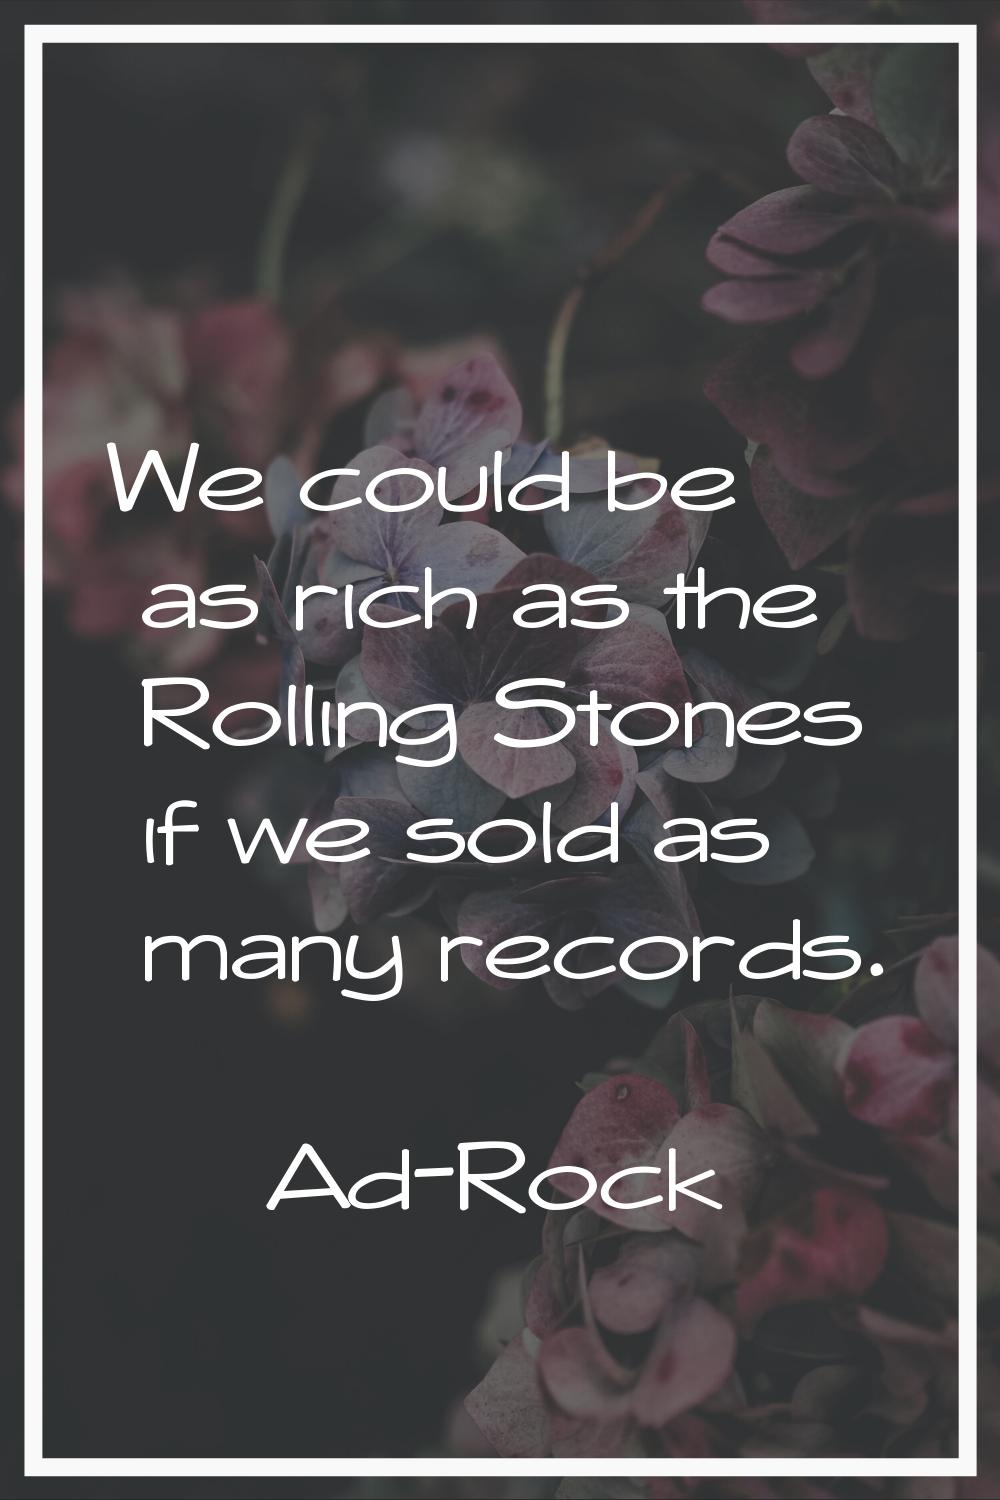 We could be as rich as the Rolling Stones if we sold as many records.